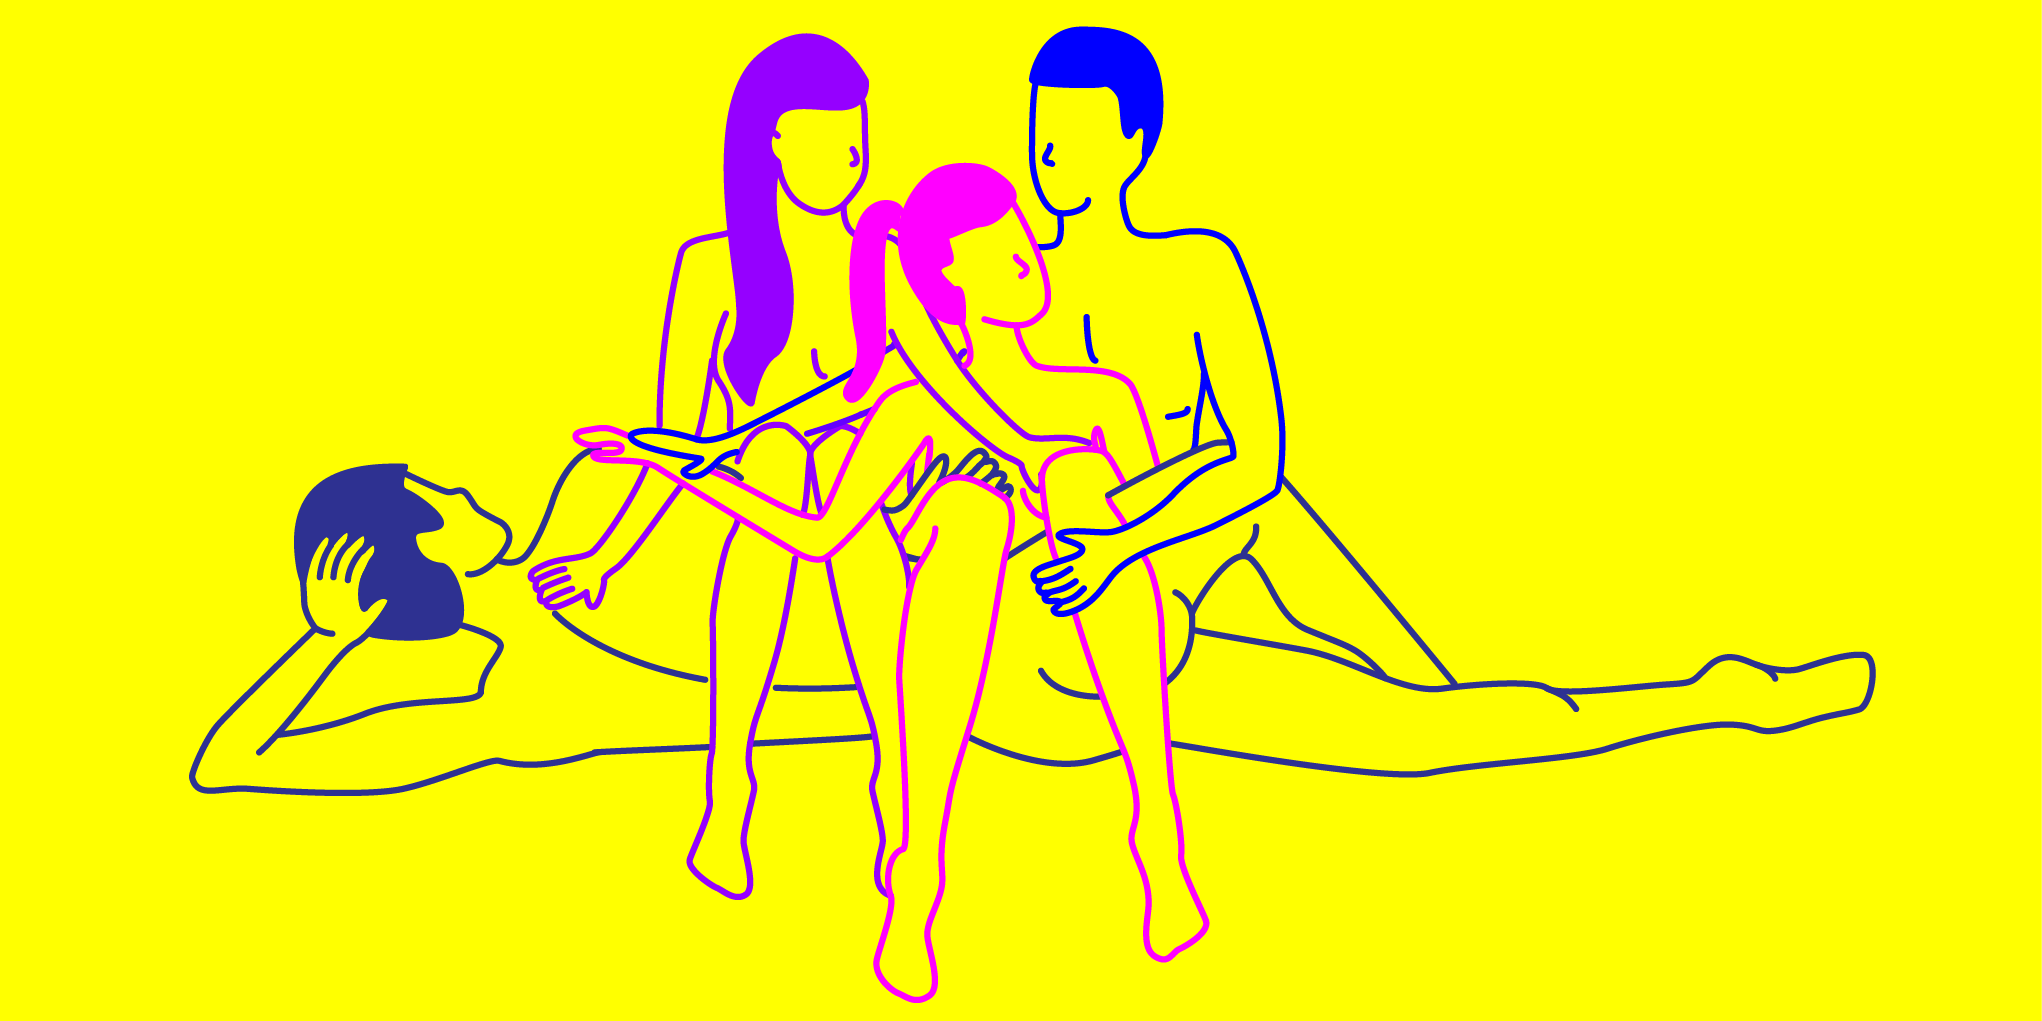 Sex Positions Orgy Diagrams - I Planned an Orgy With My Best Friend and It Was the Most Liberating  Experience of My Life